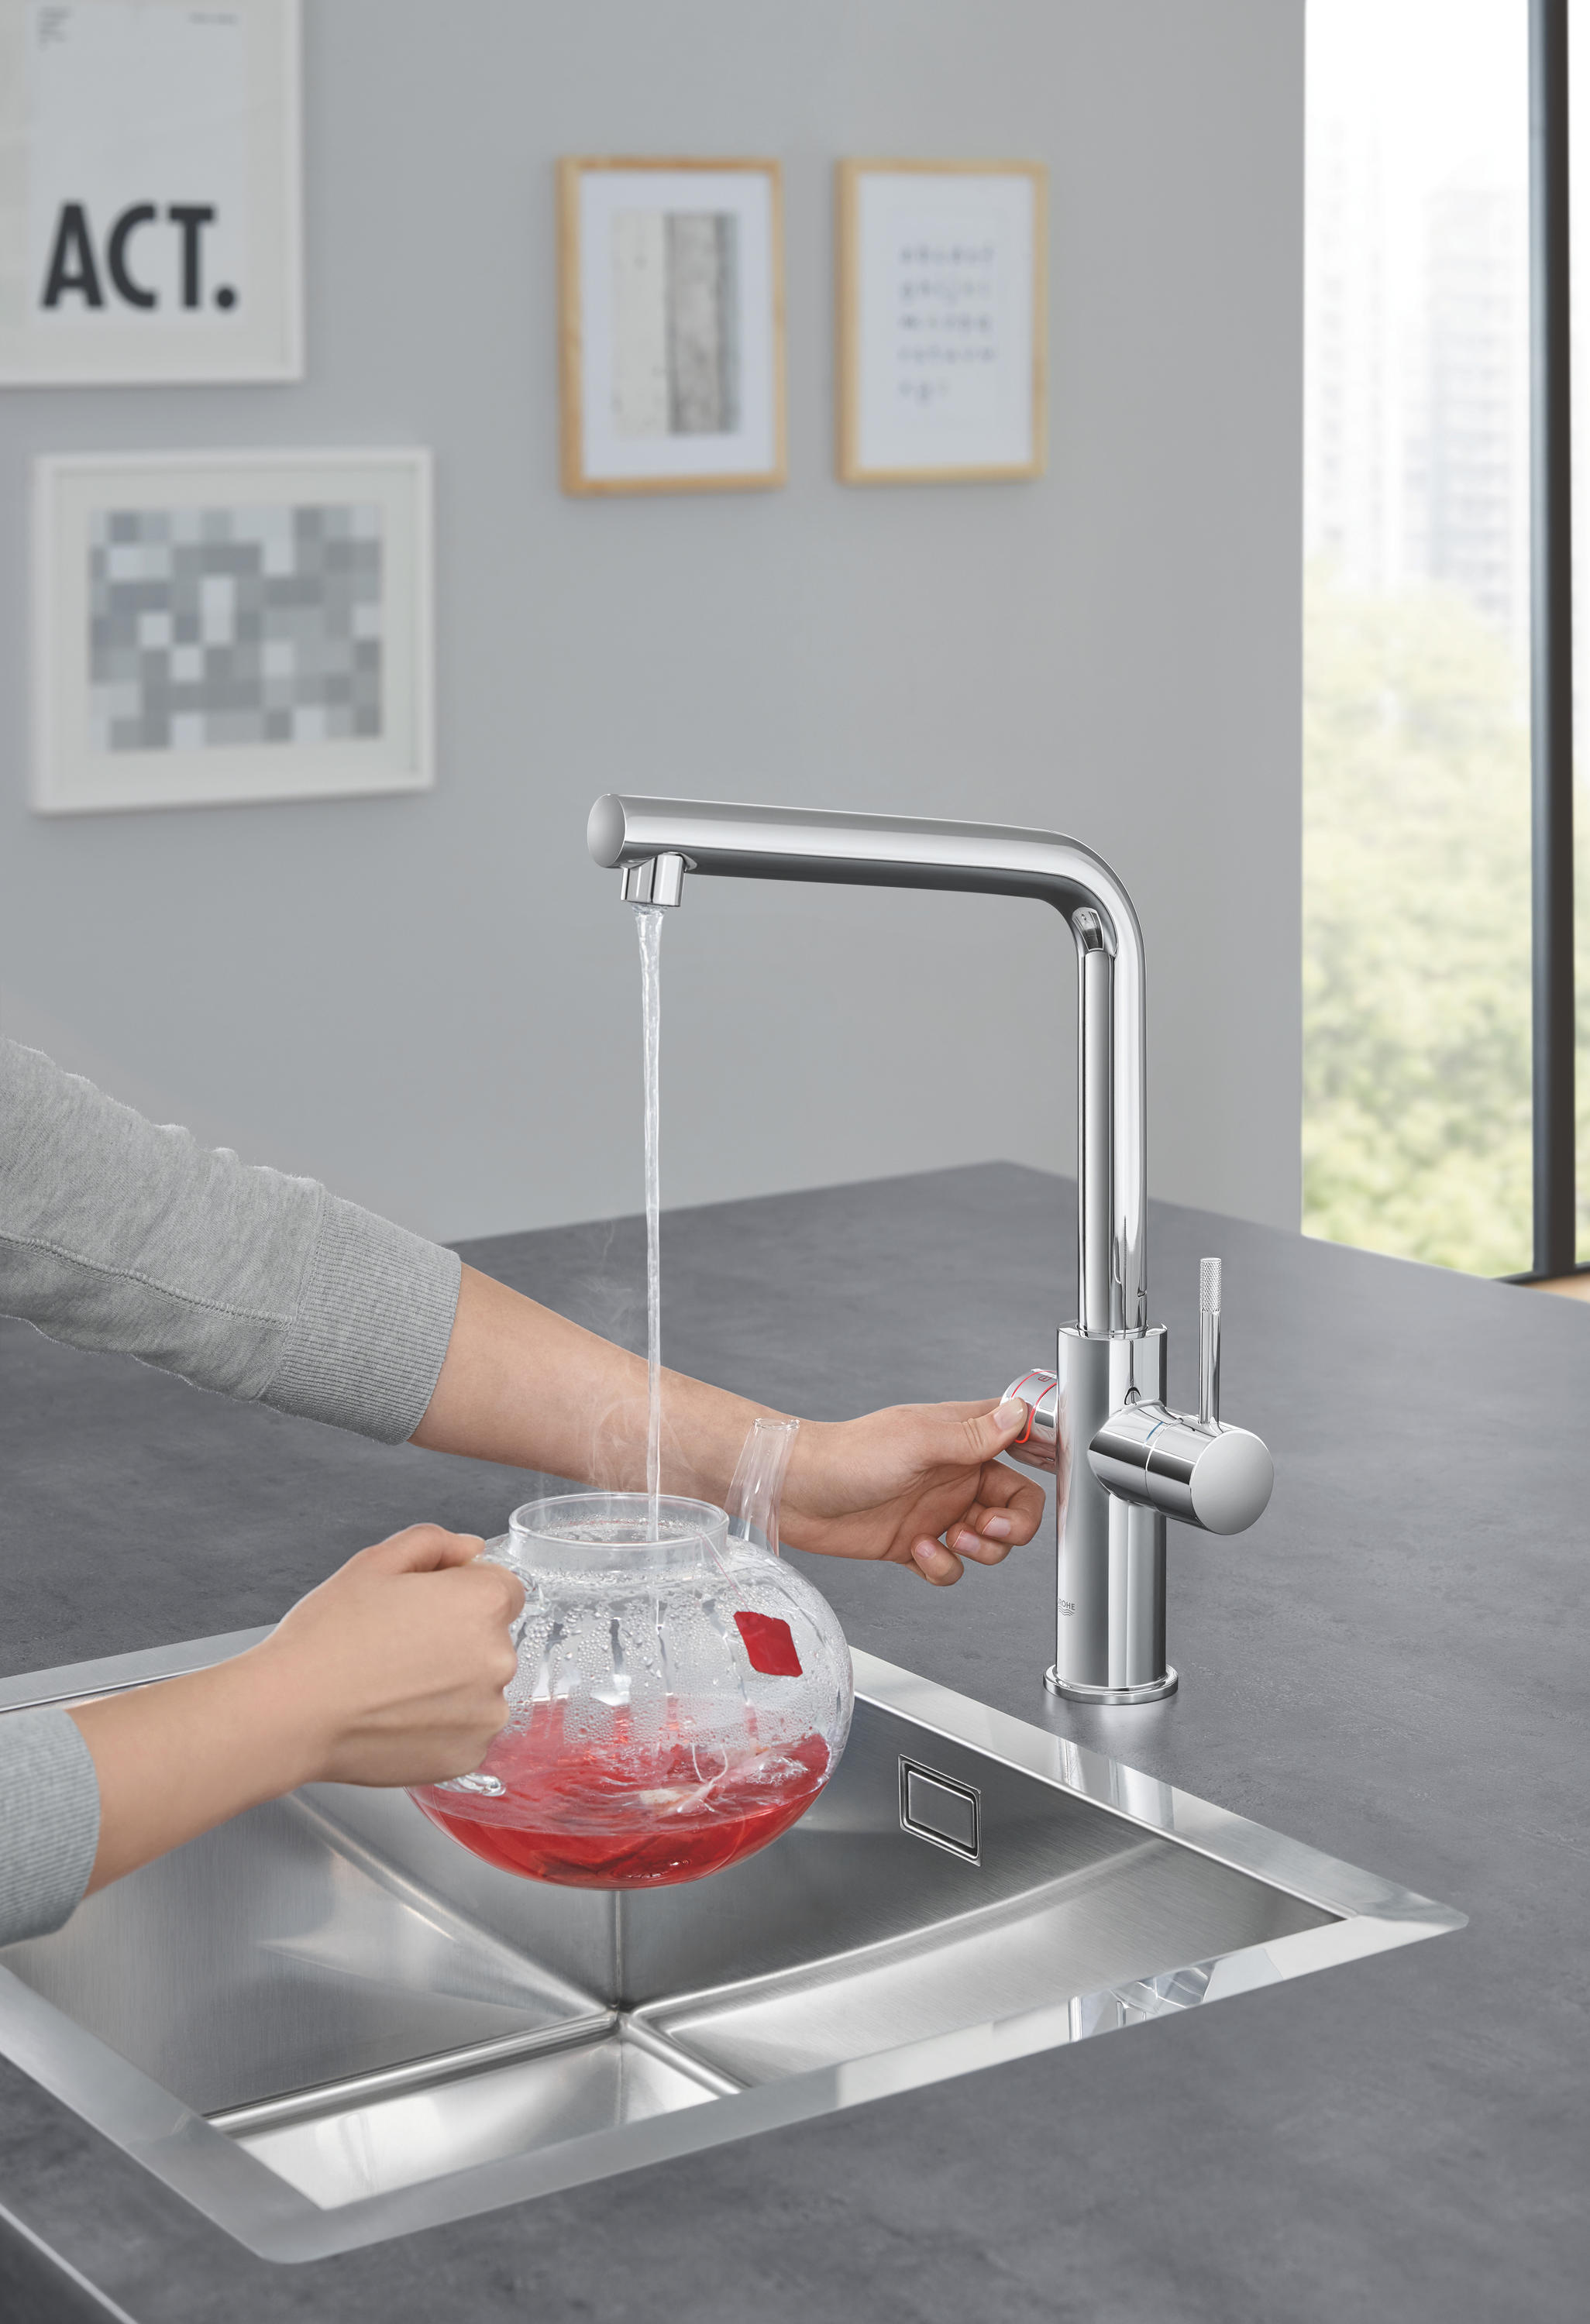 GROHE Red Faucet L size boiler | Architonic